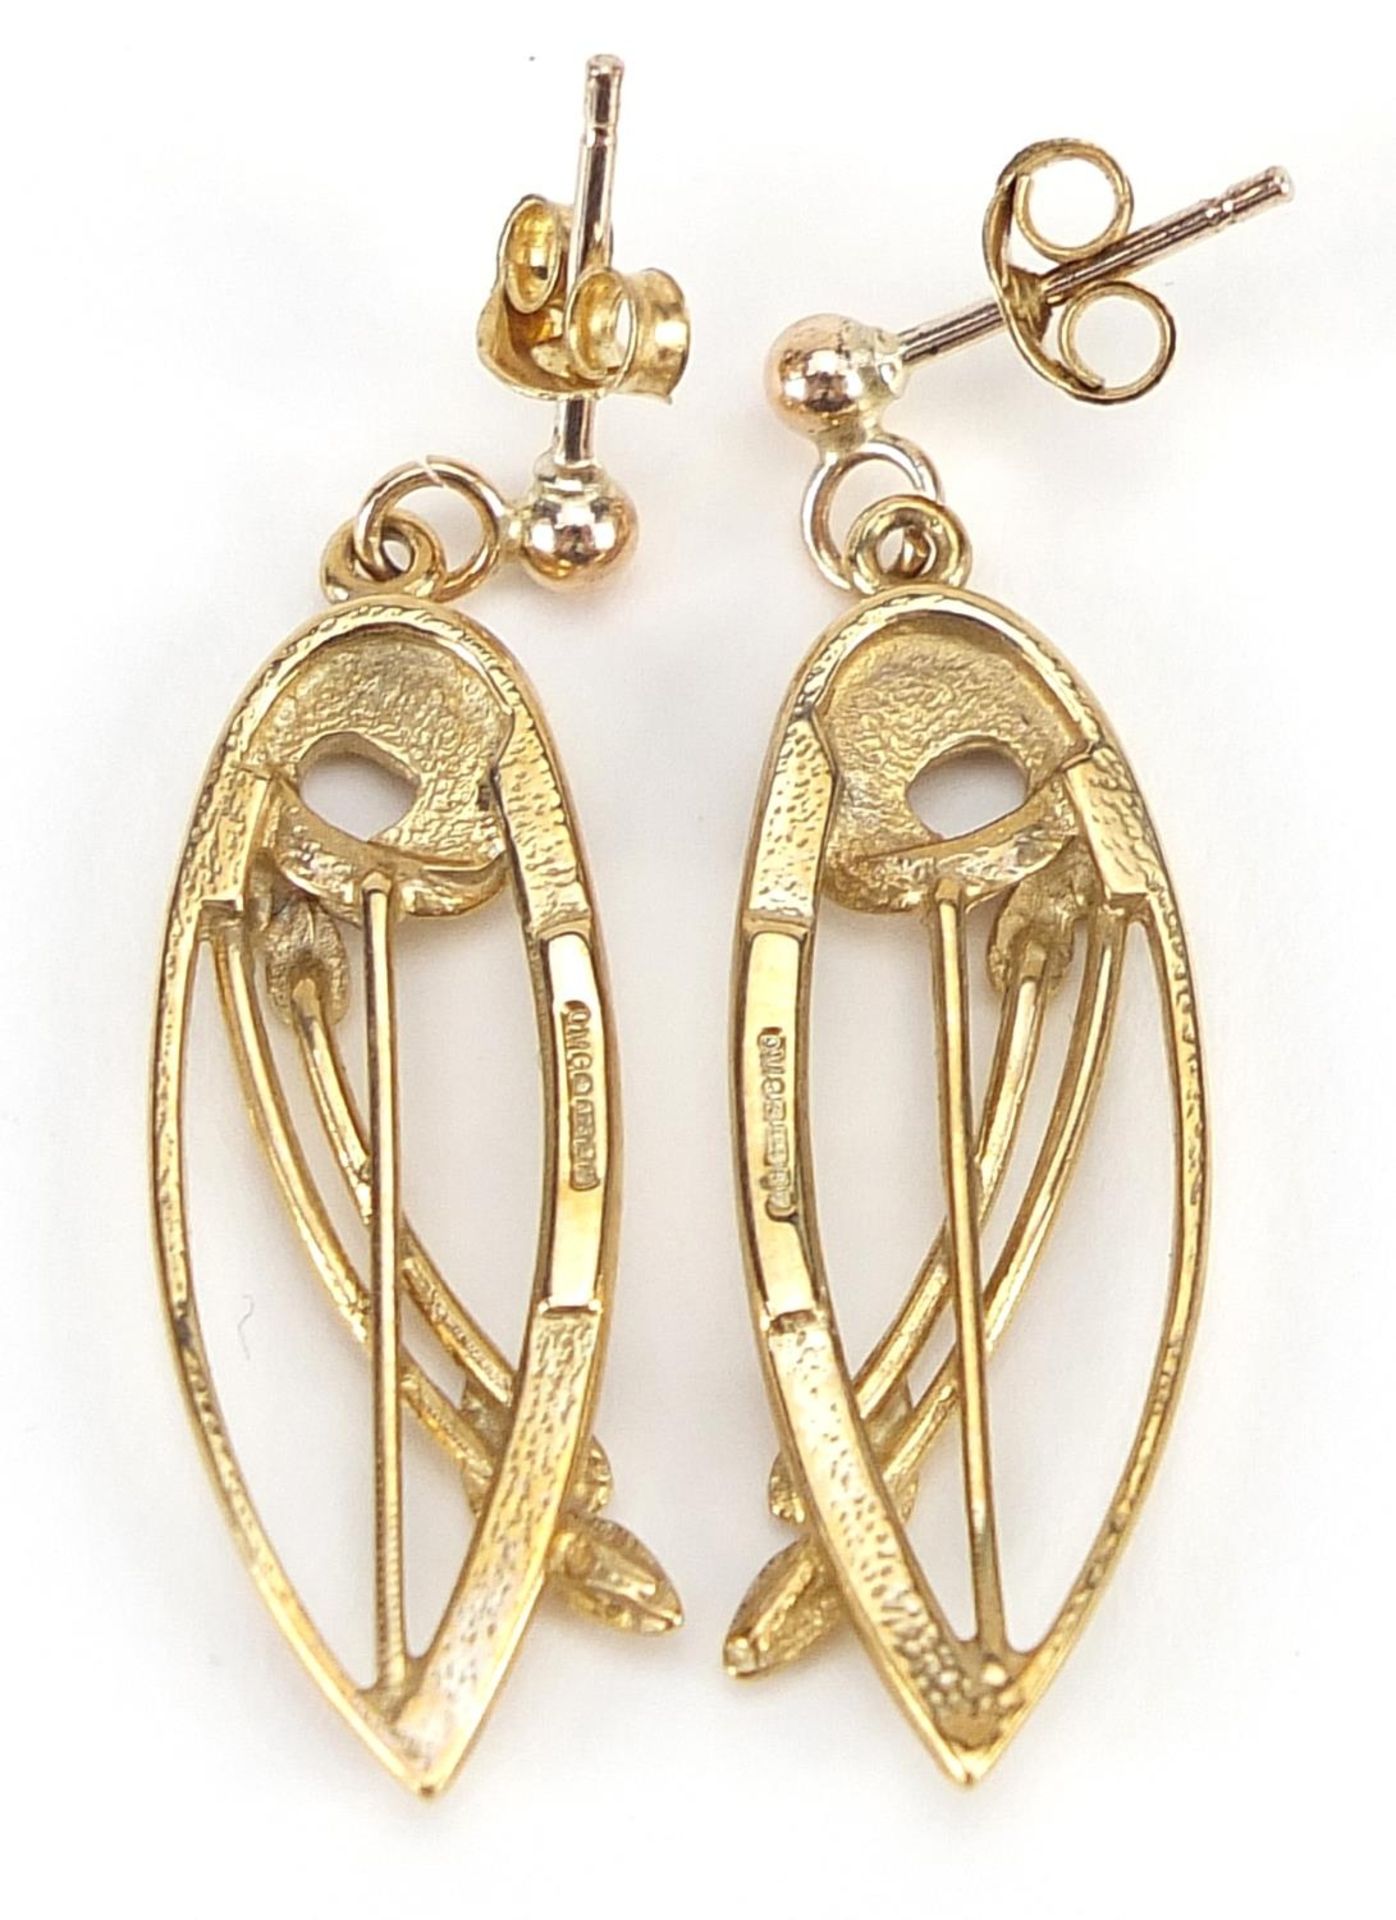 Pair of 9ct gold Rennie Mackintosh design drop earrings, 3.2cm high, 4.0g - Image 2 of 5